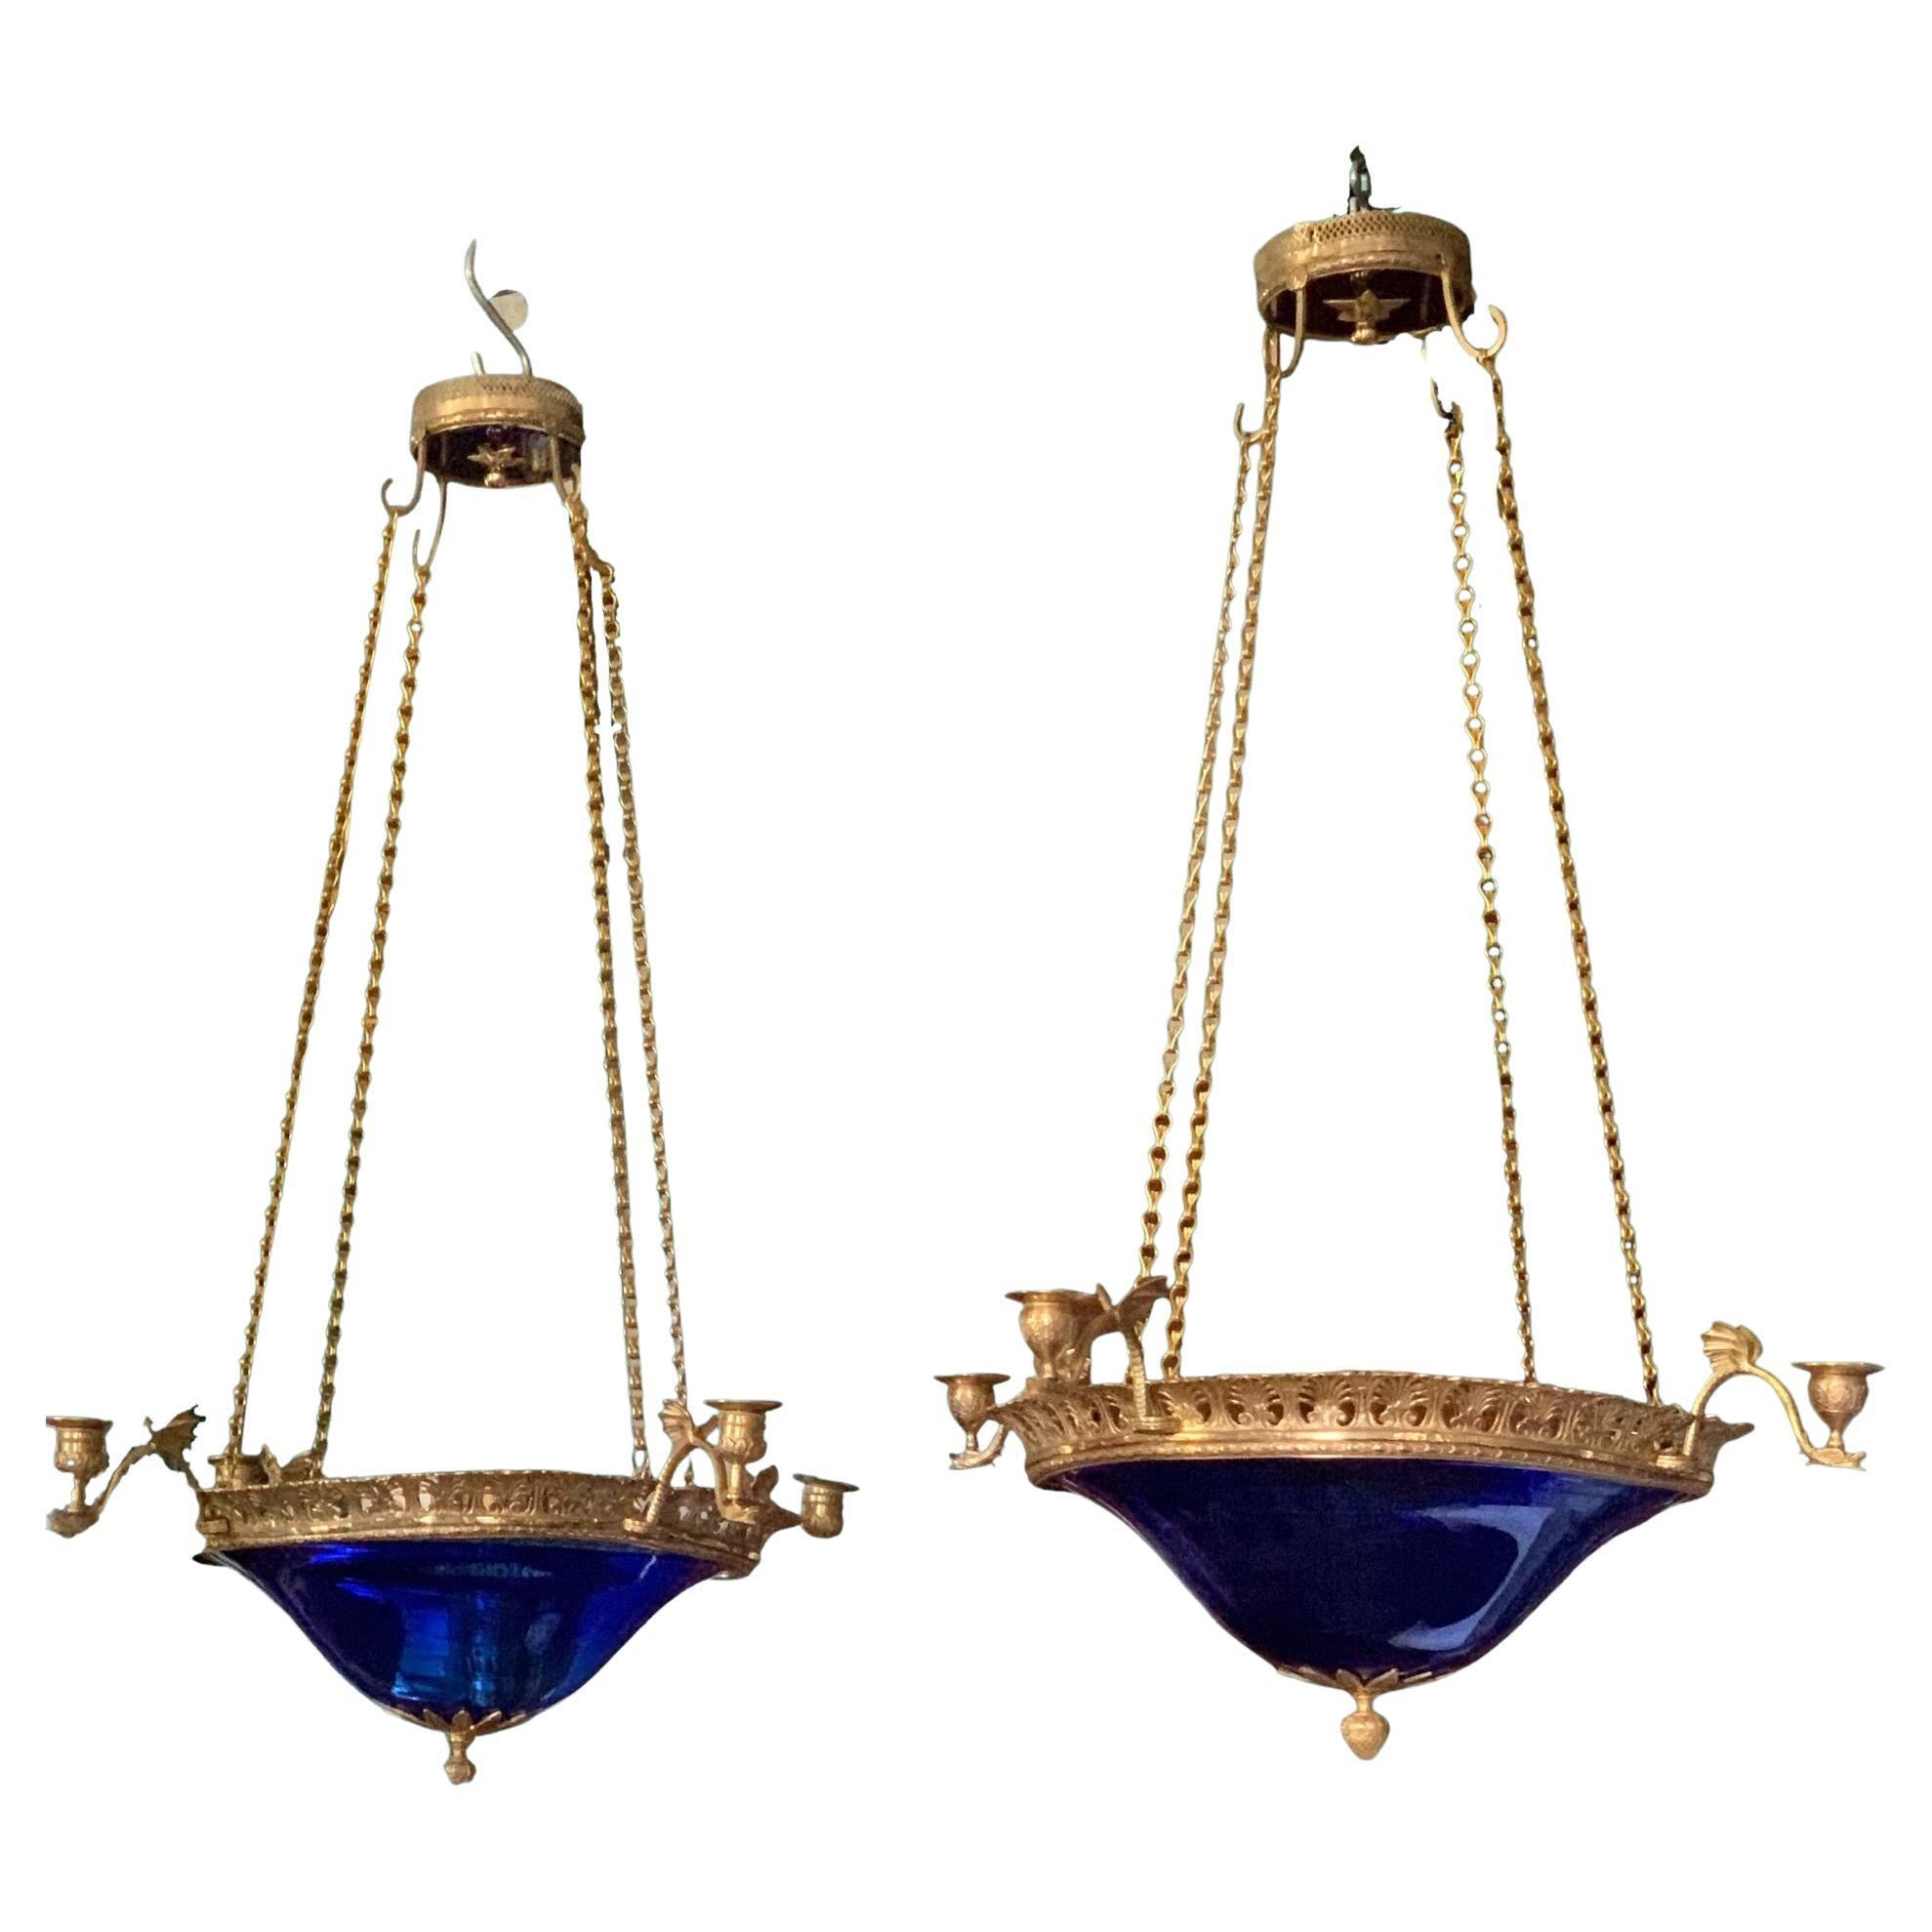 Pair of Lanterns, Blue Bowls and gilt bronze, Neo-classic, Empire Baltic Style  For Sale